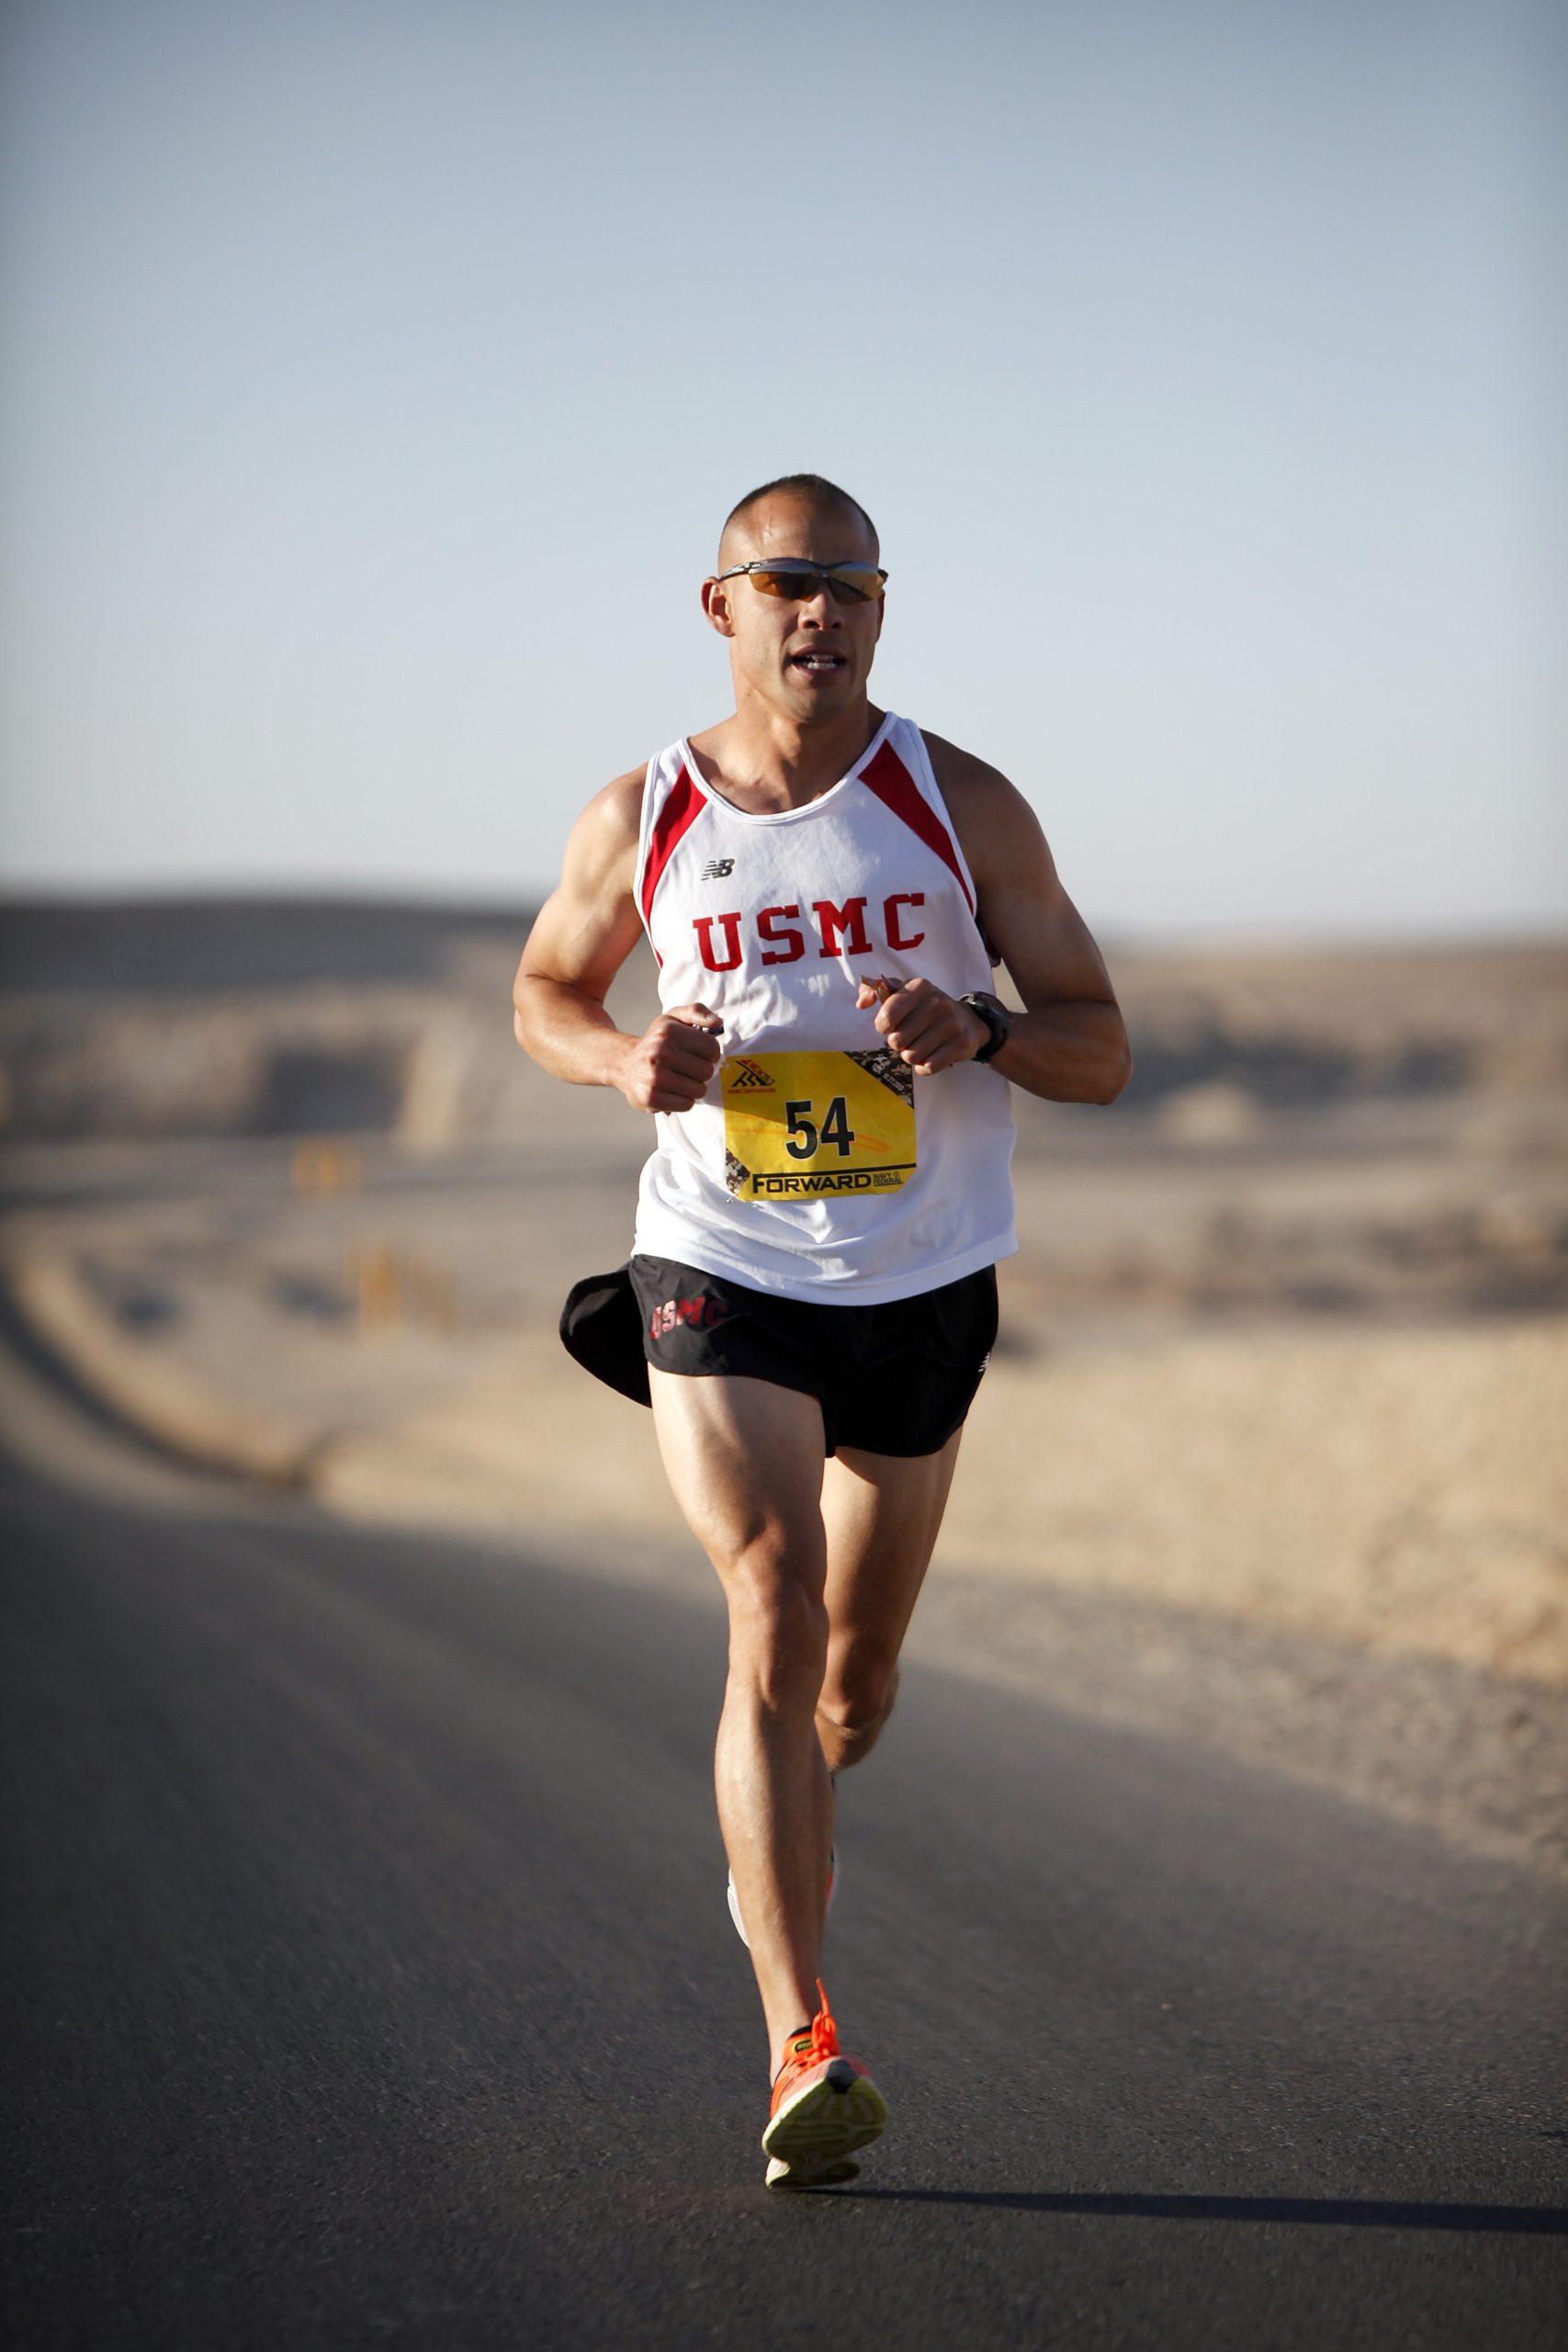 A runner with the letters "usmc" on his shirt and a race bib numbered 54 competes in a marathon on an asphalt road in a desert-like environment.